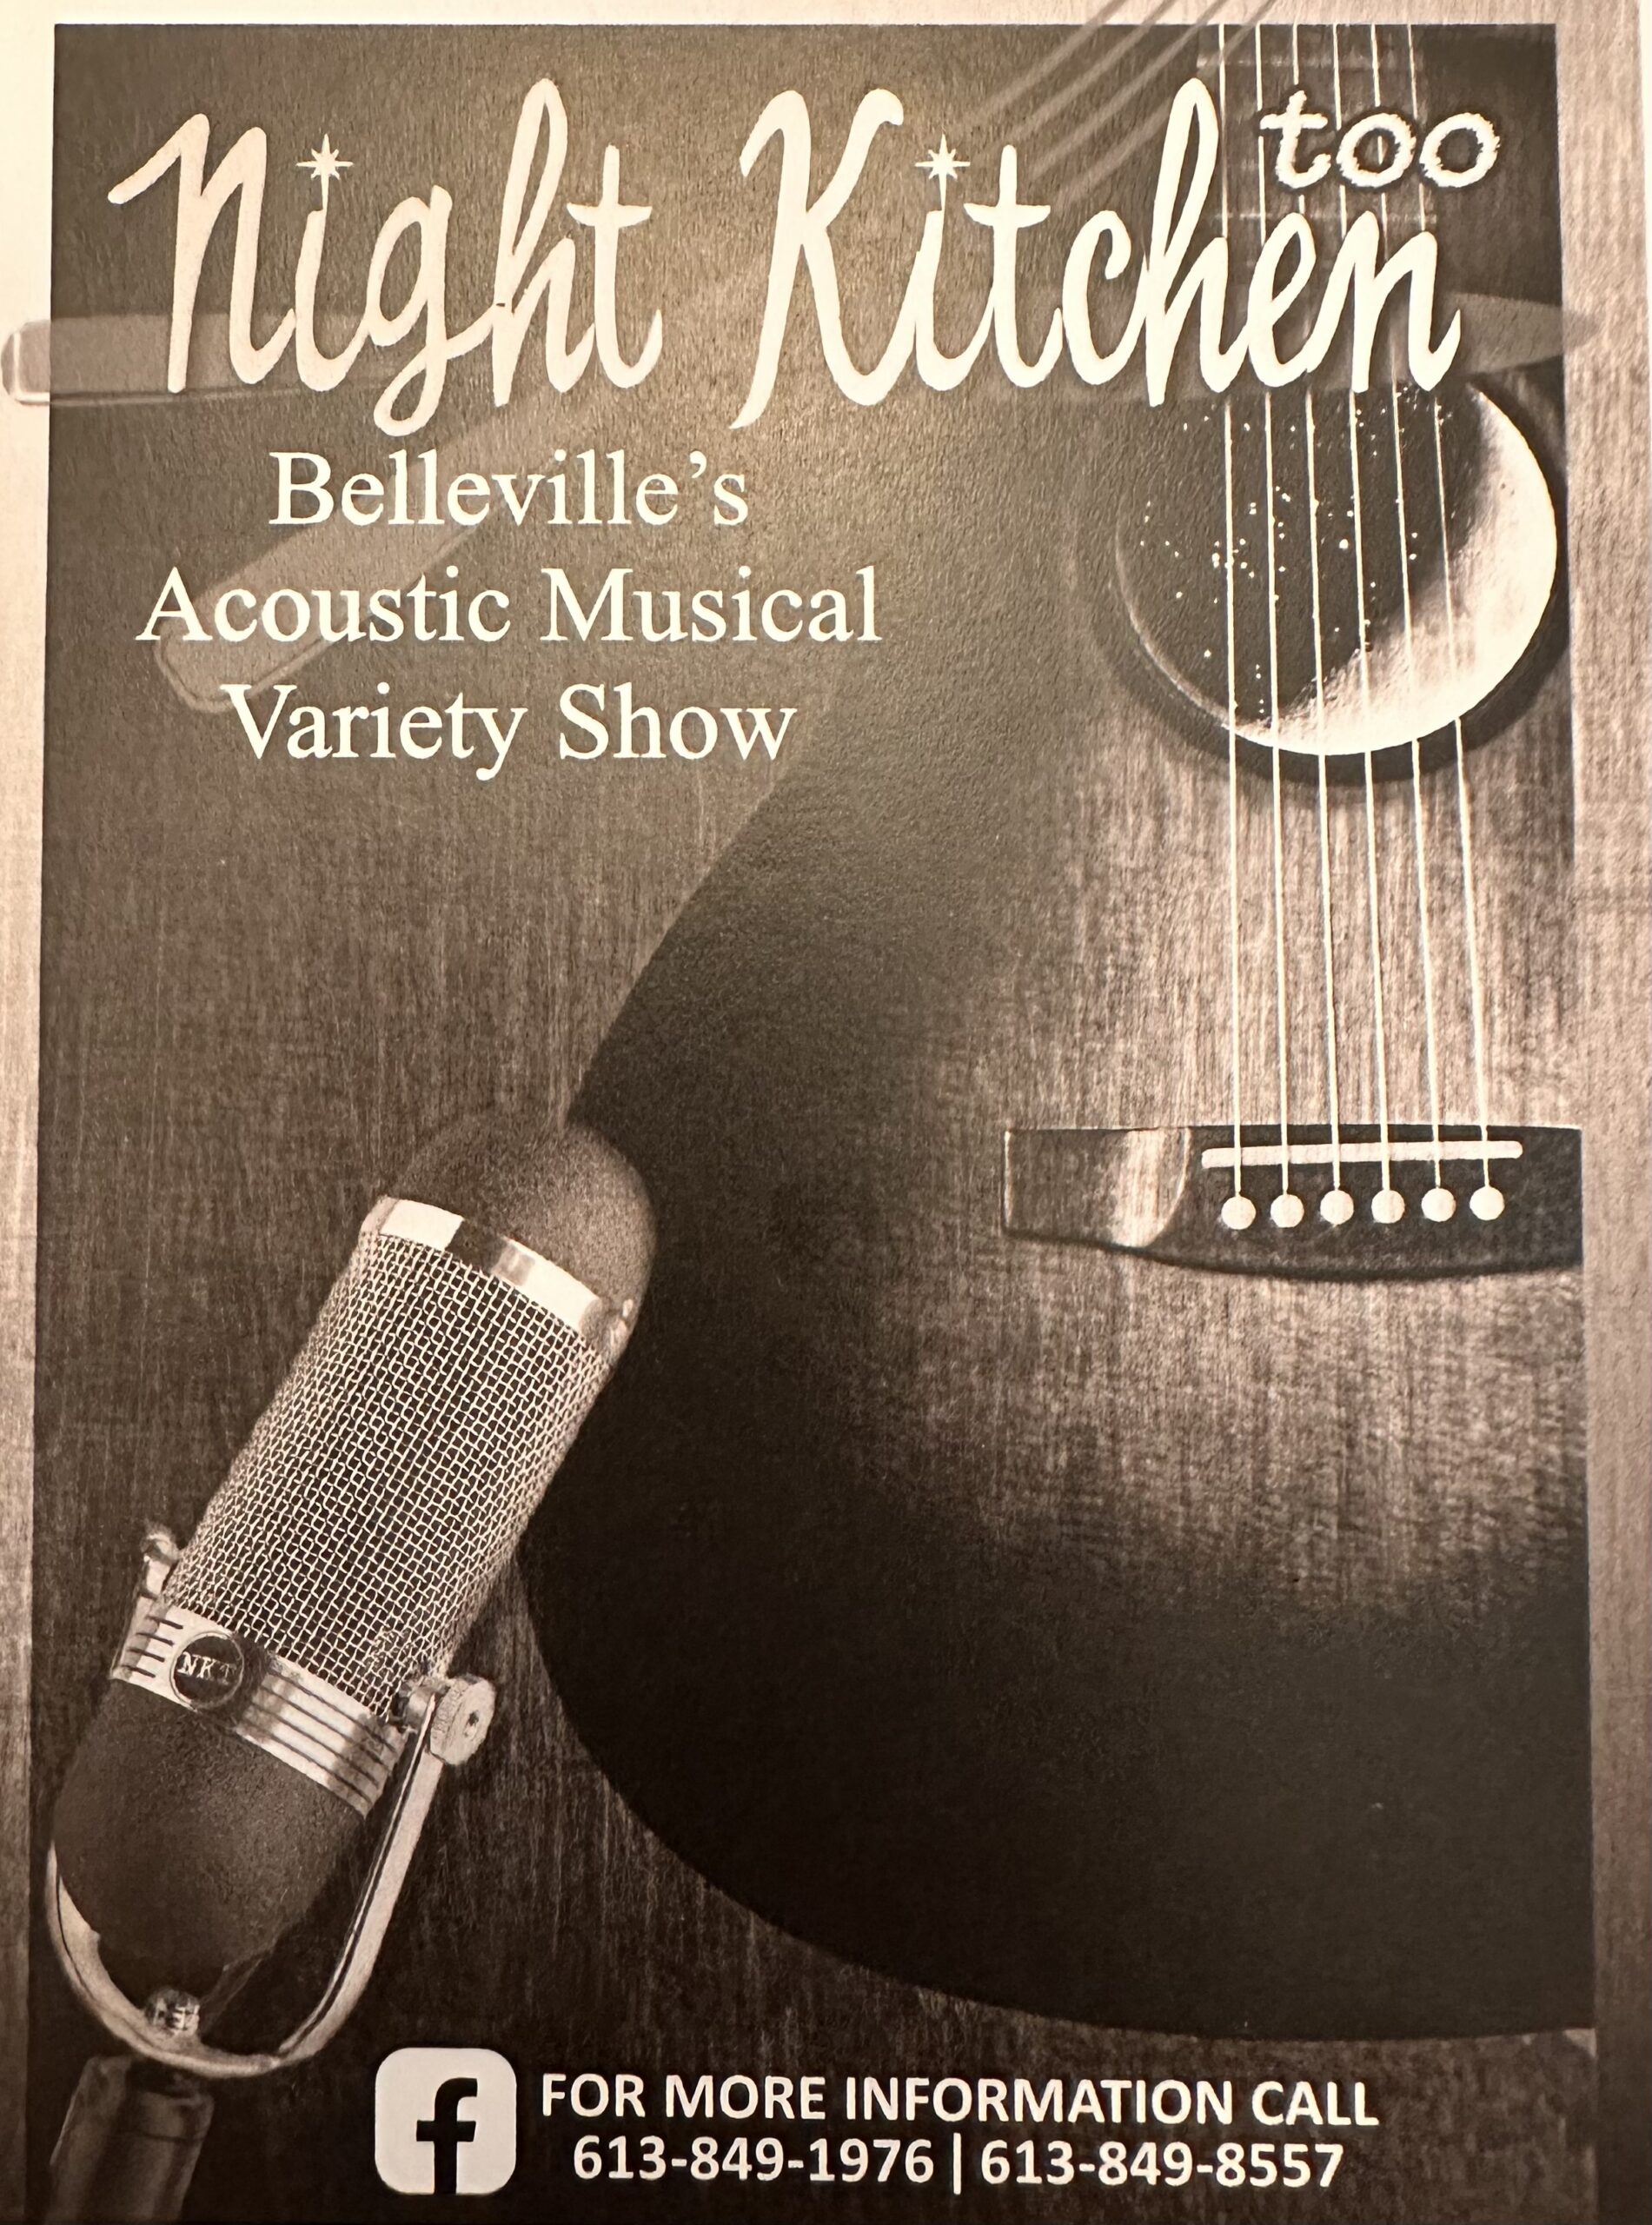 poster titled "night kitchen too" with photo of acoustic guitat